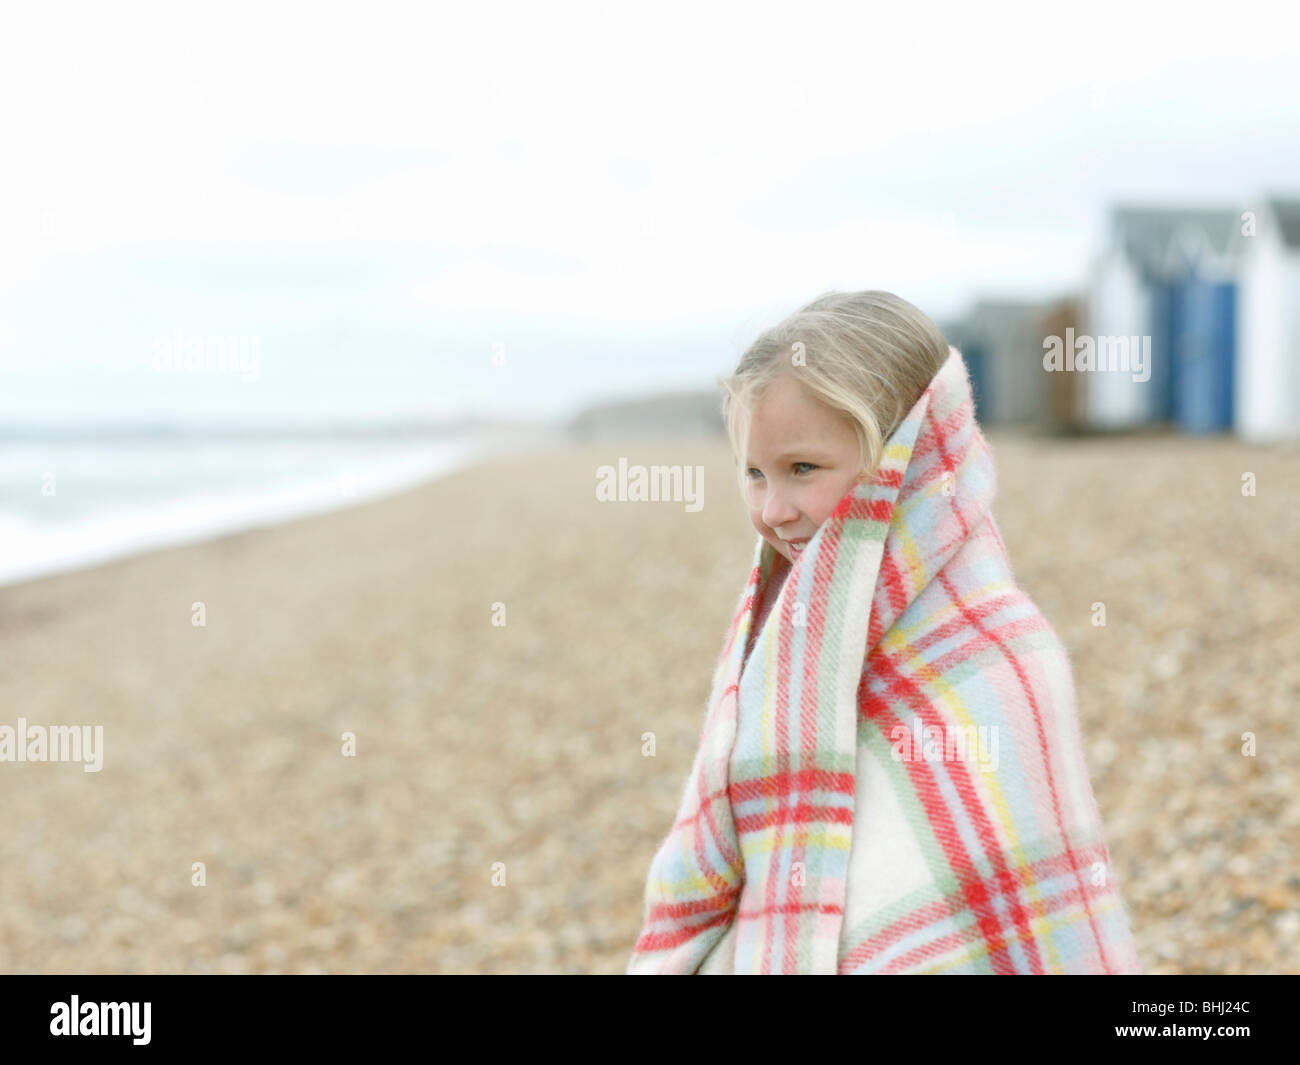 young Girl huddled in blanket Stock Photo